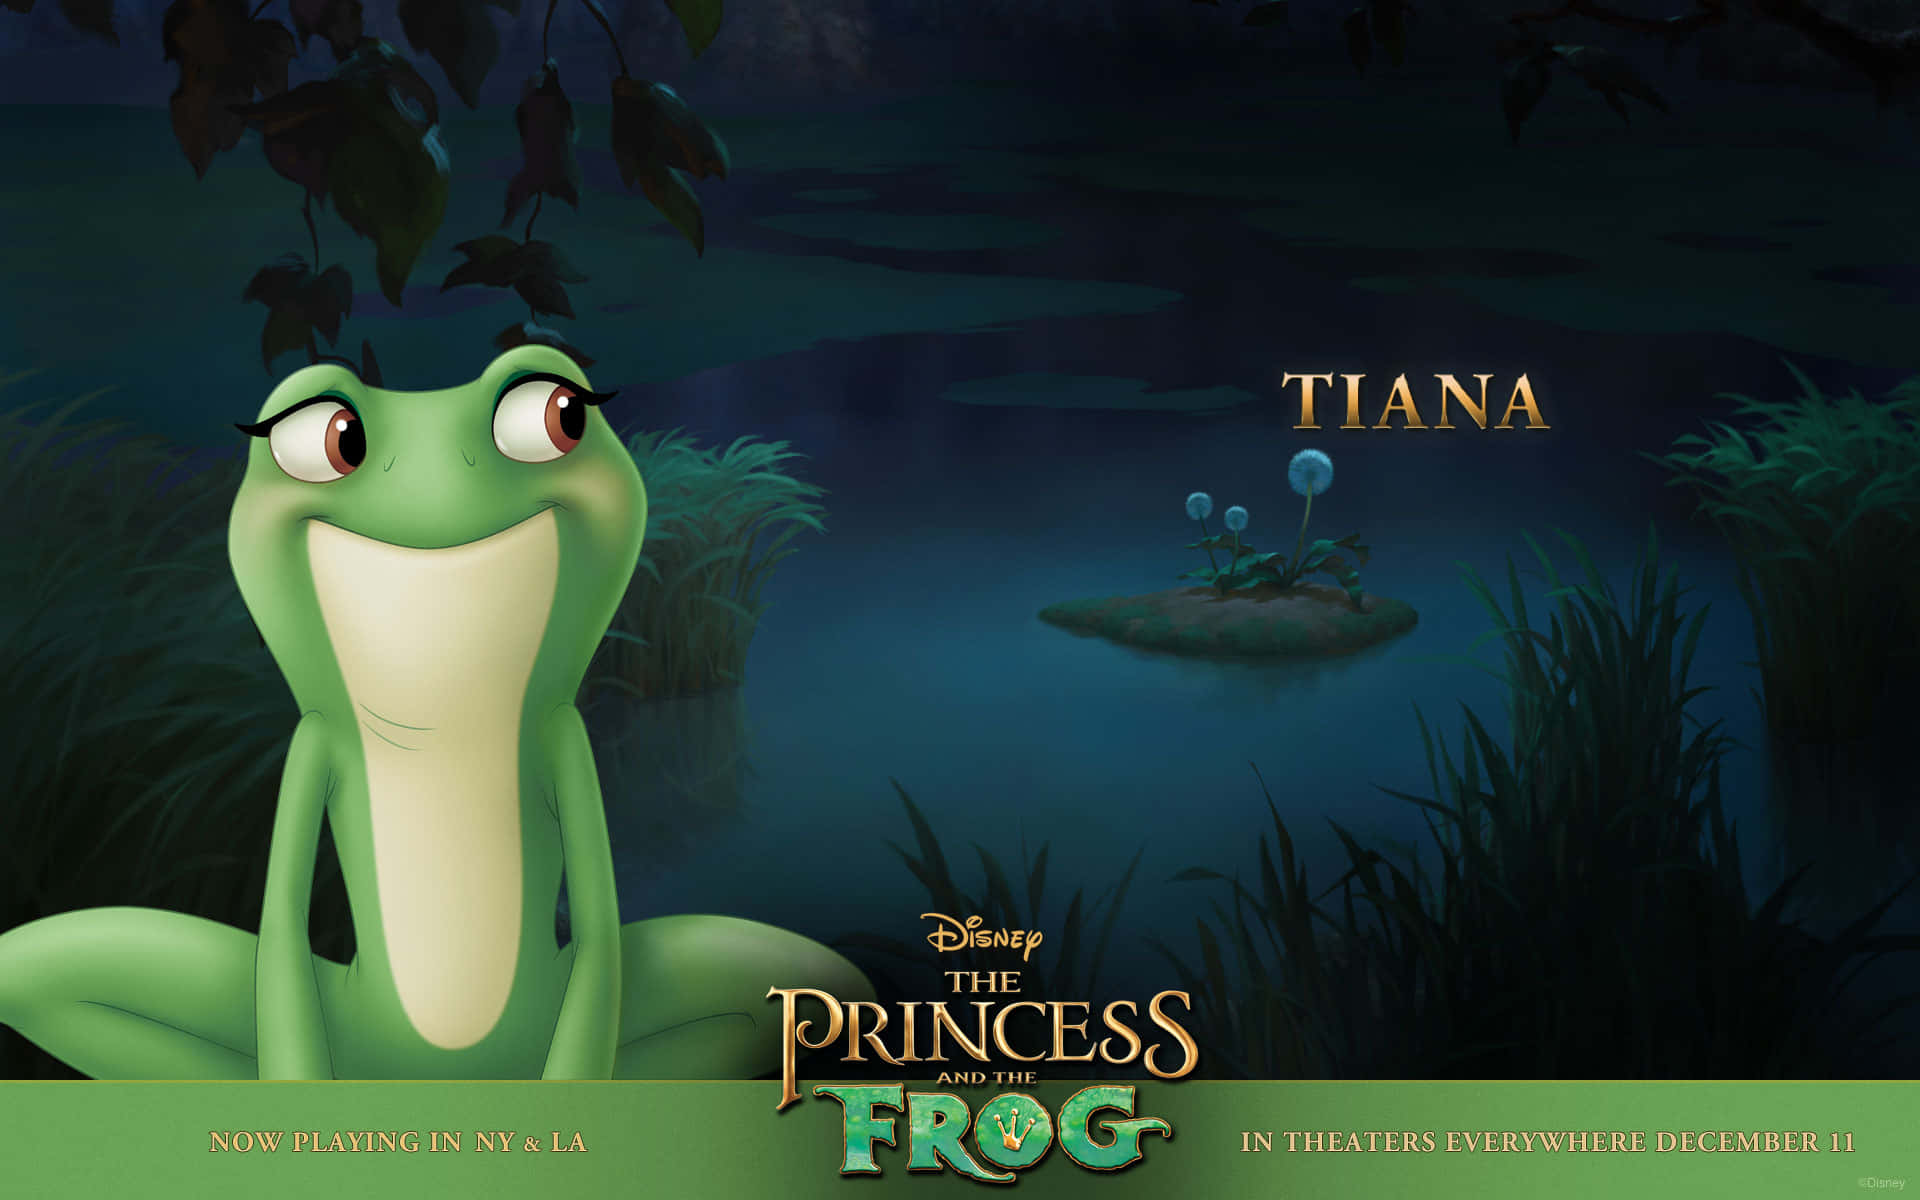 Princess Tiana and Prince Naveen in Disney’s The Princess and The Frog